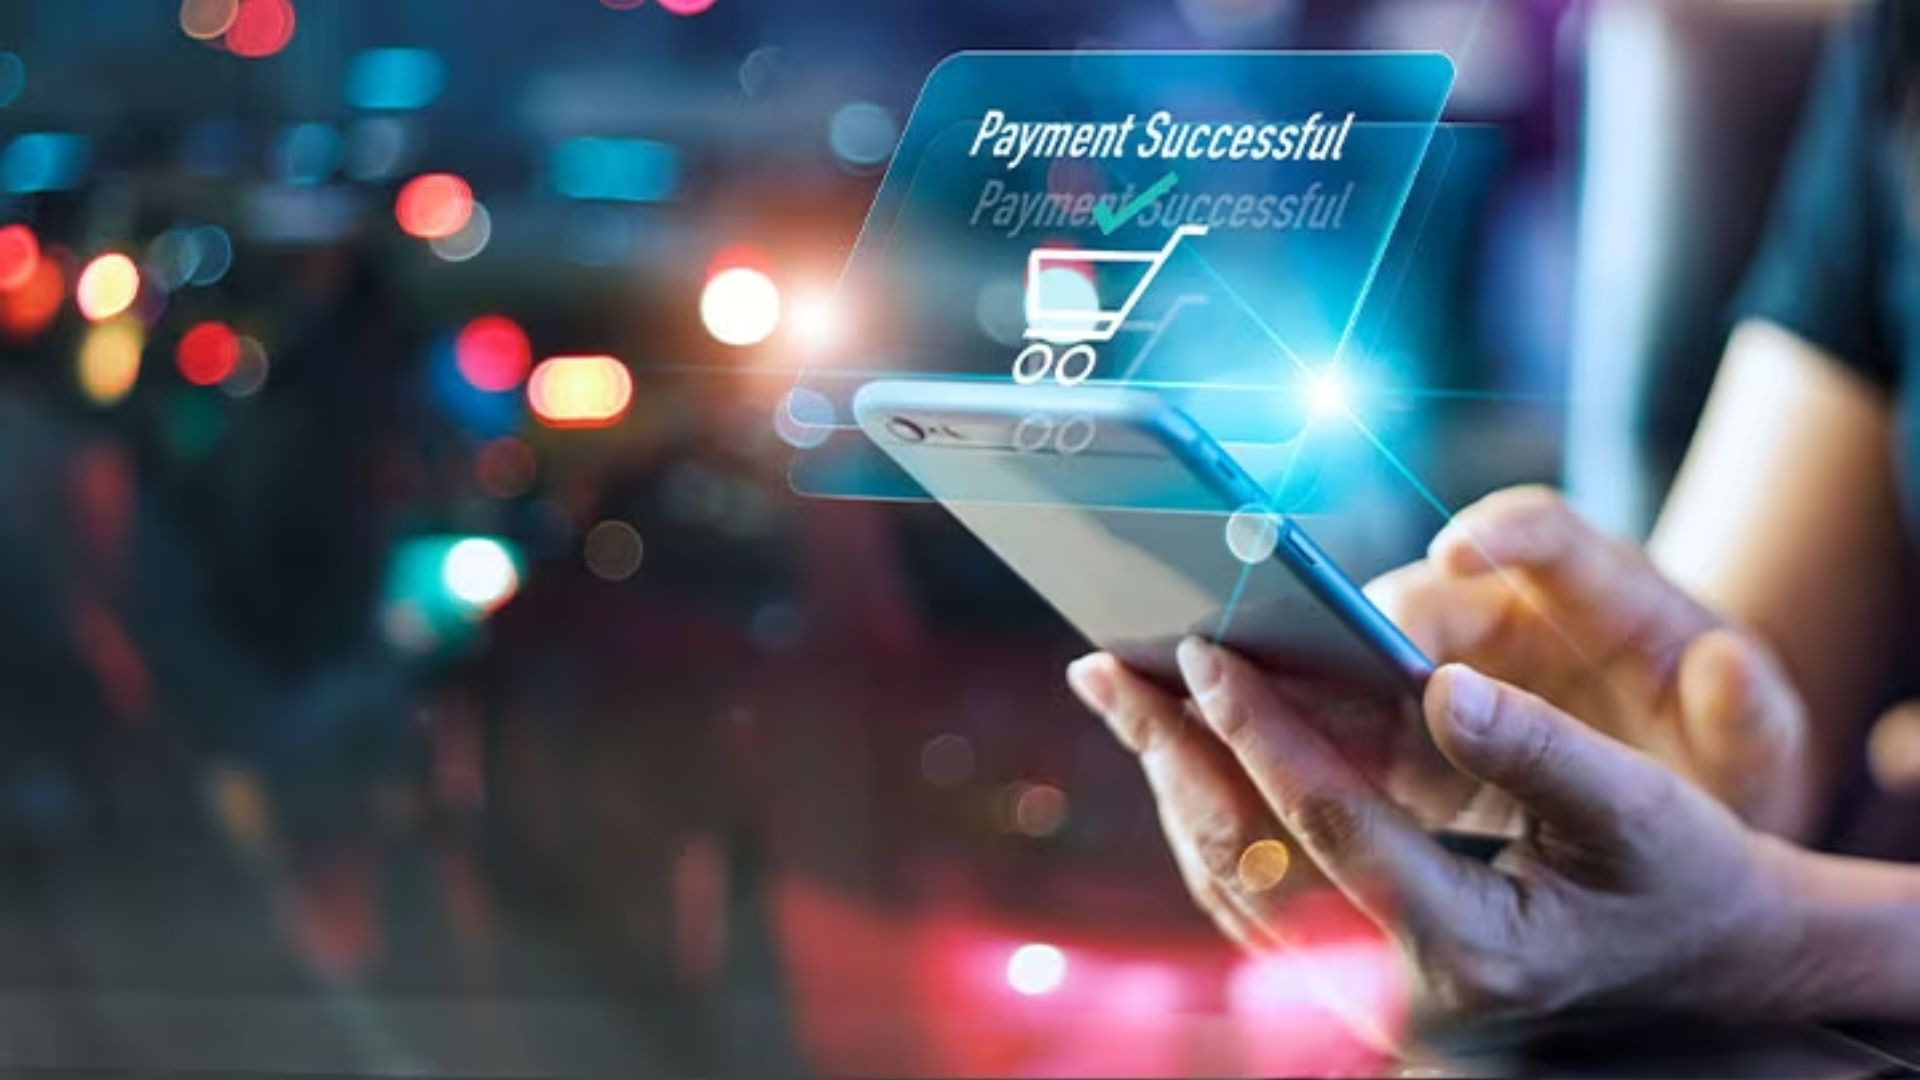 Mobile Banking: Convenience and Security at Your Fingertips